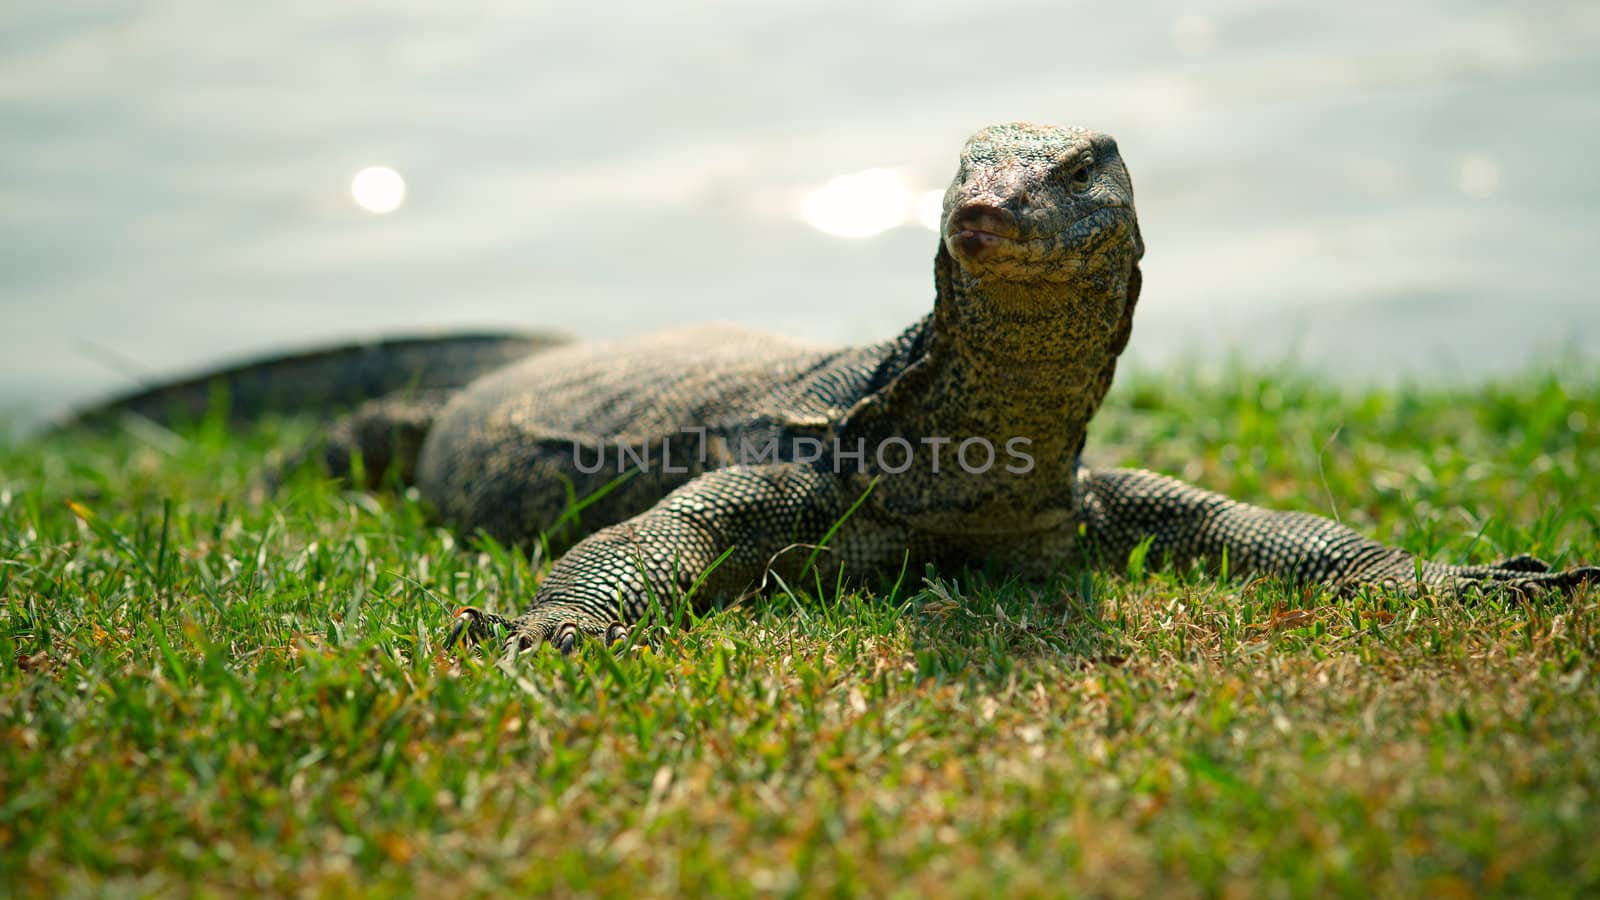 Large monitor lizard on the grass, close-up